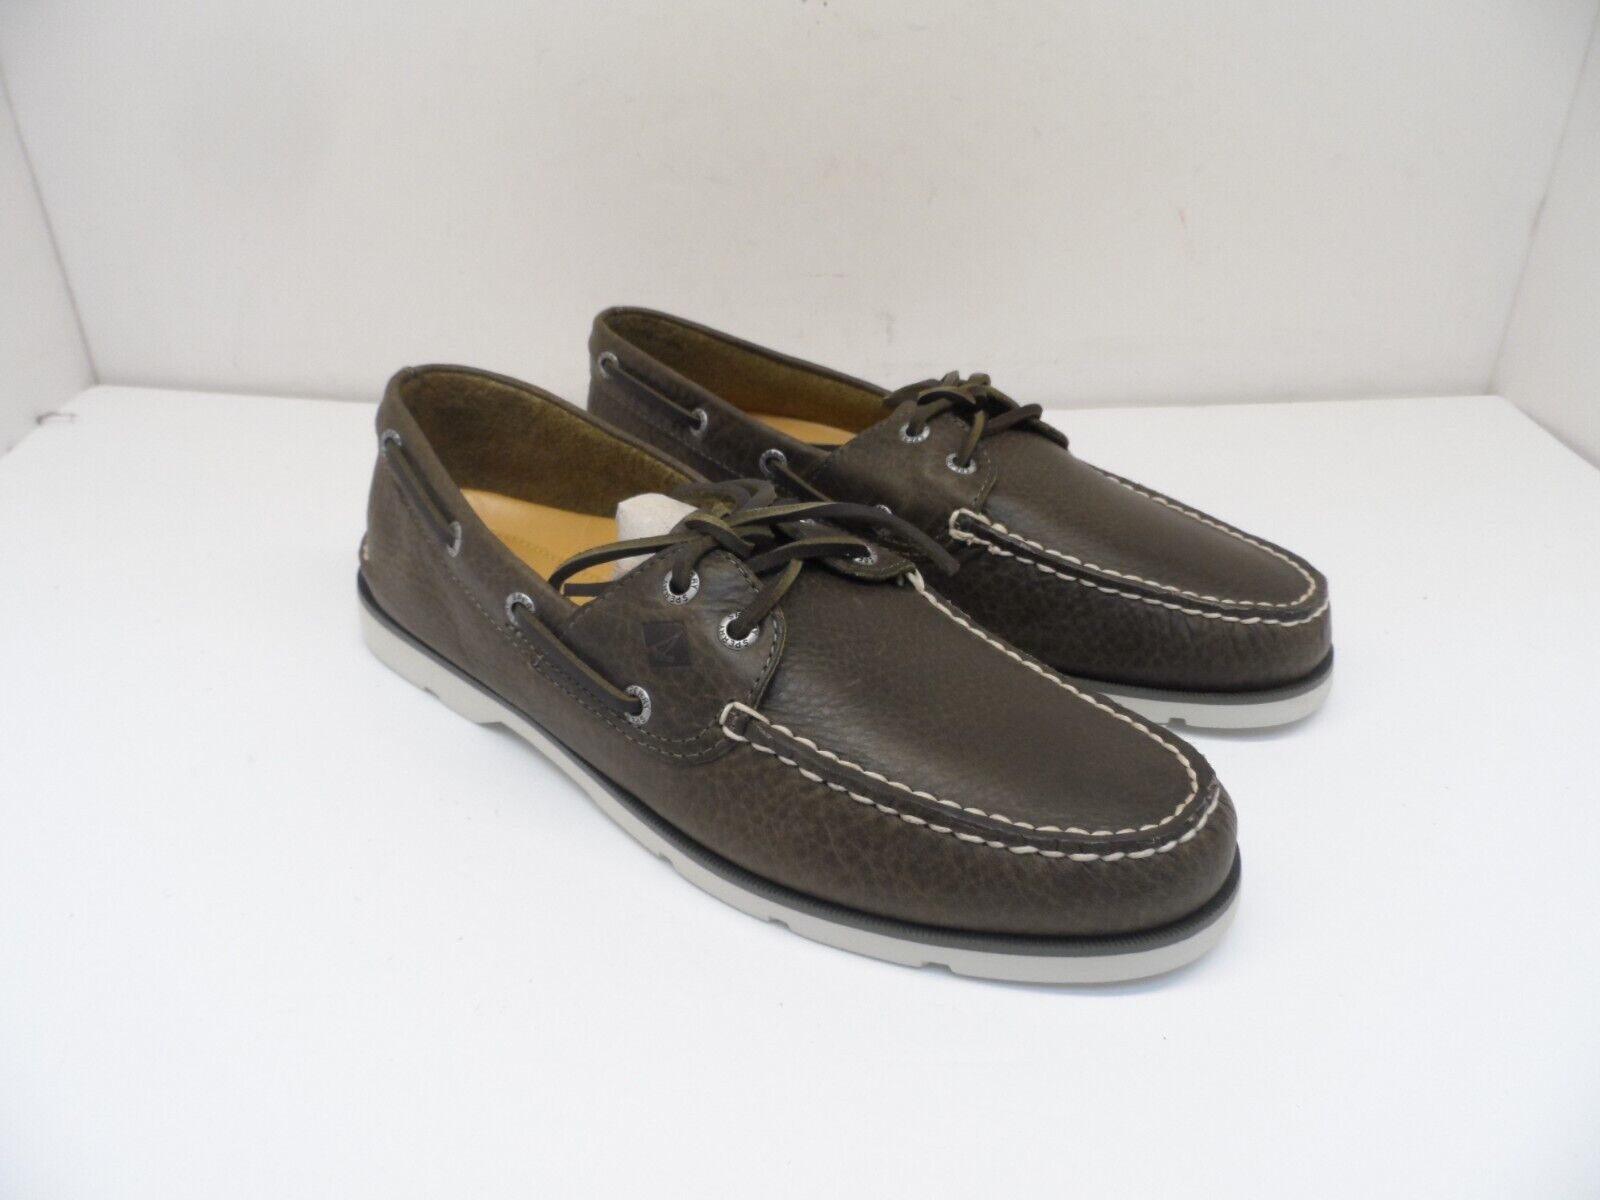 Primary image for Sperry Top Sider Men's STS23674 Leeward Tumbled Boat Shoe Dark Olive Size 9M